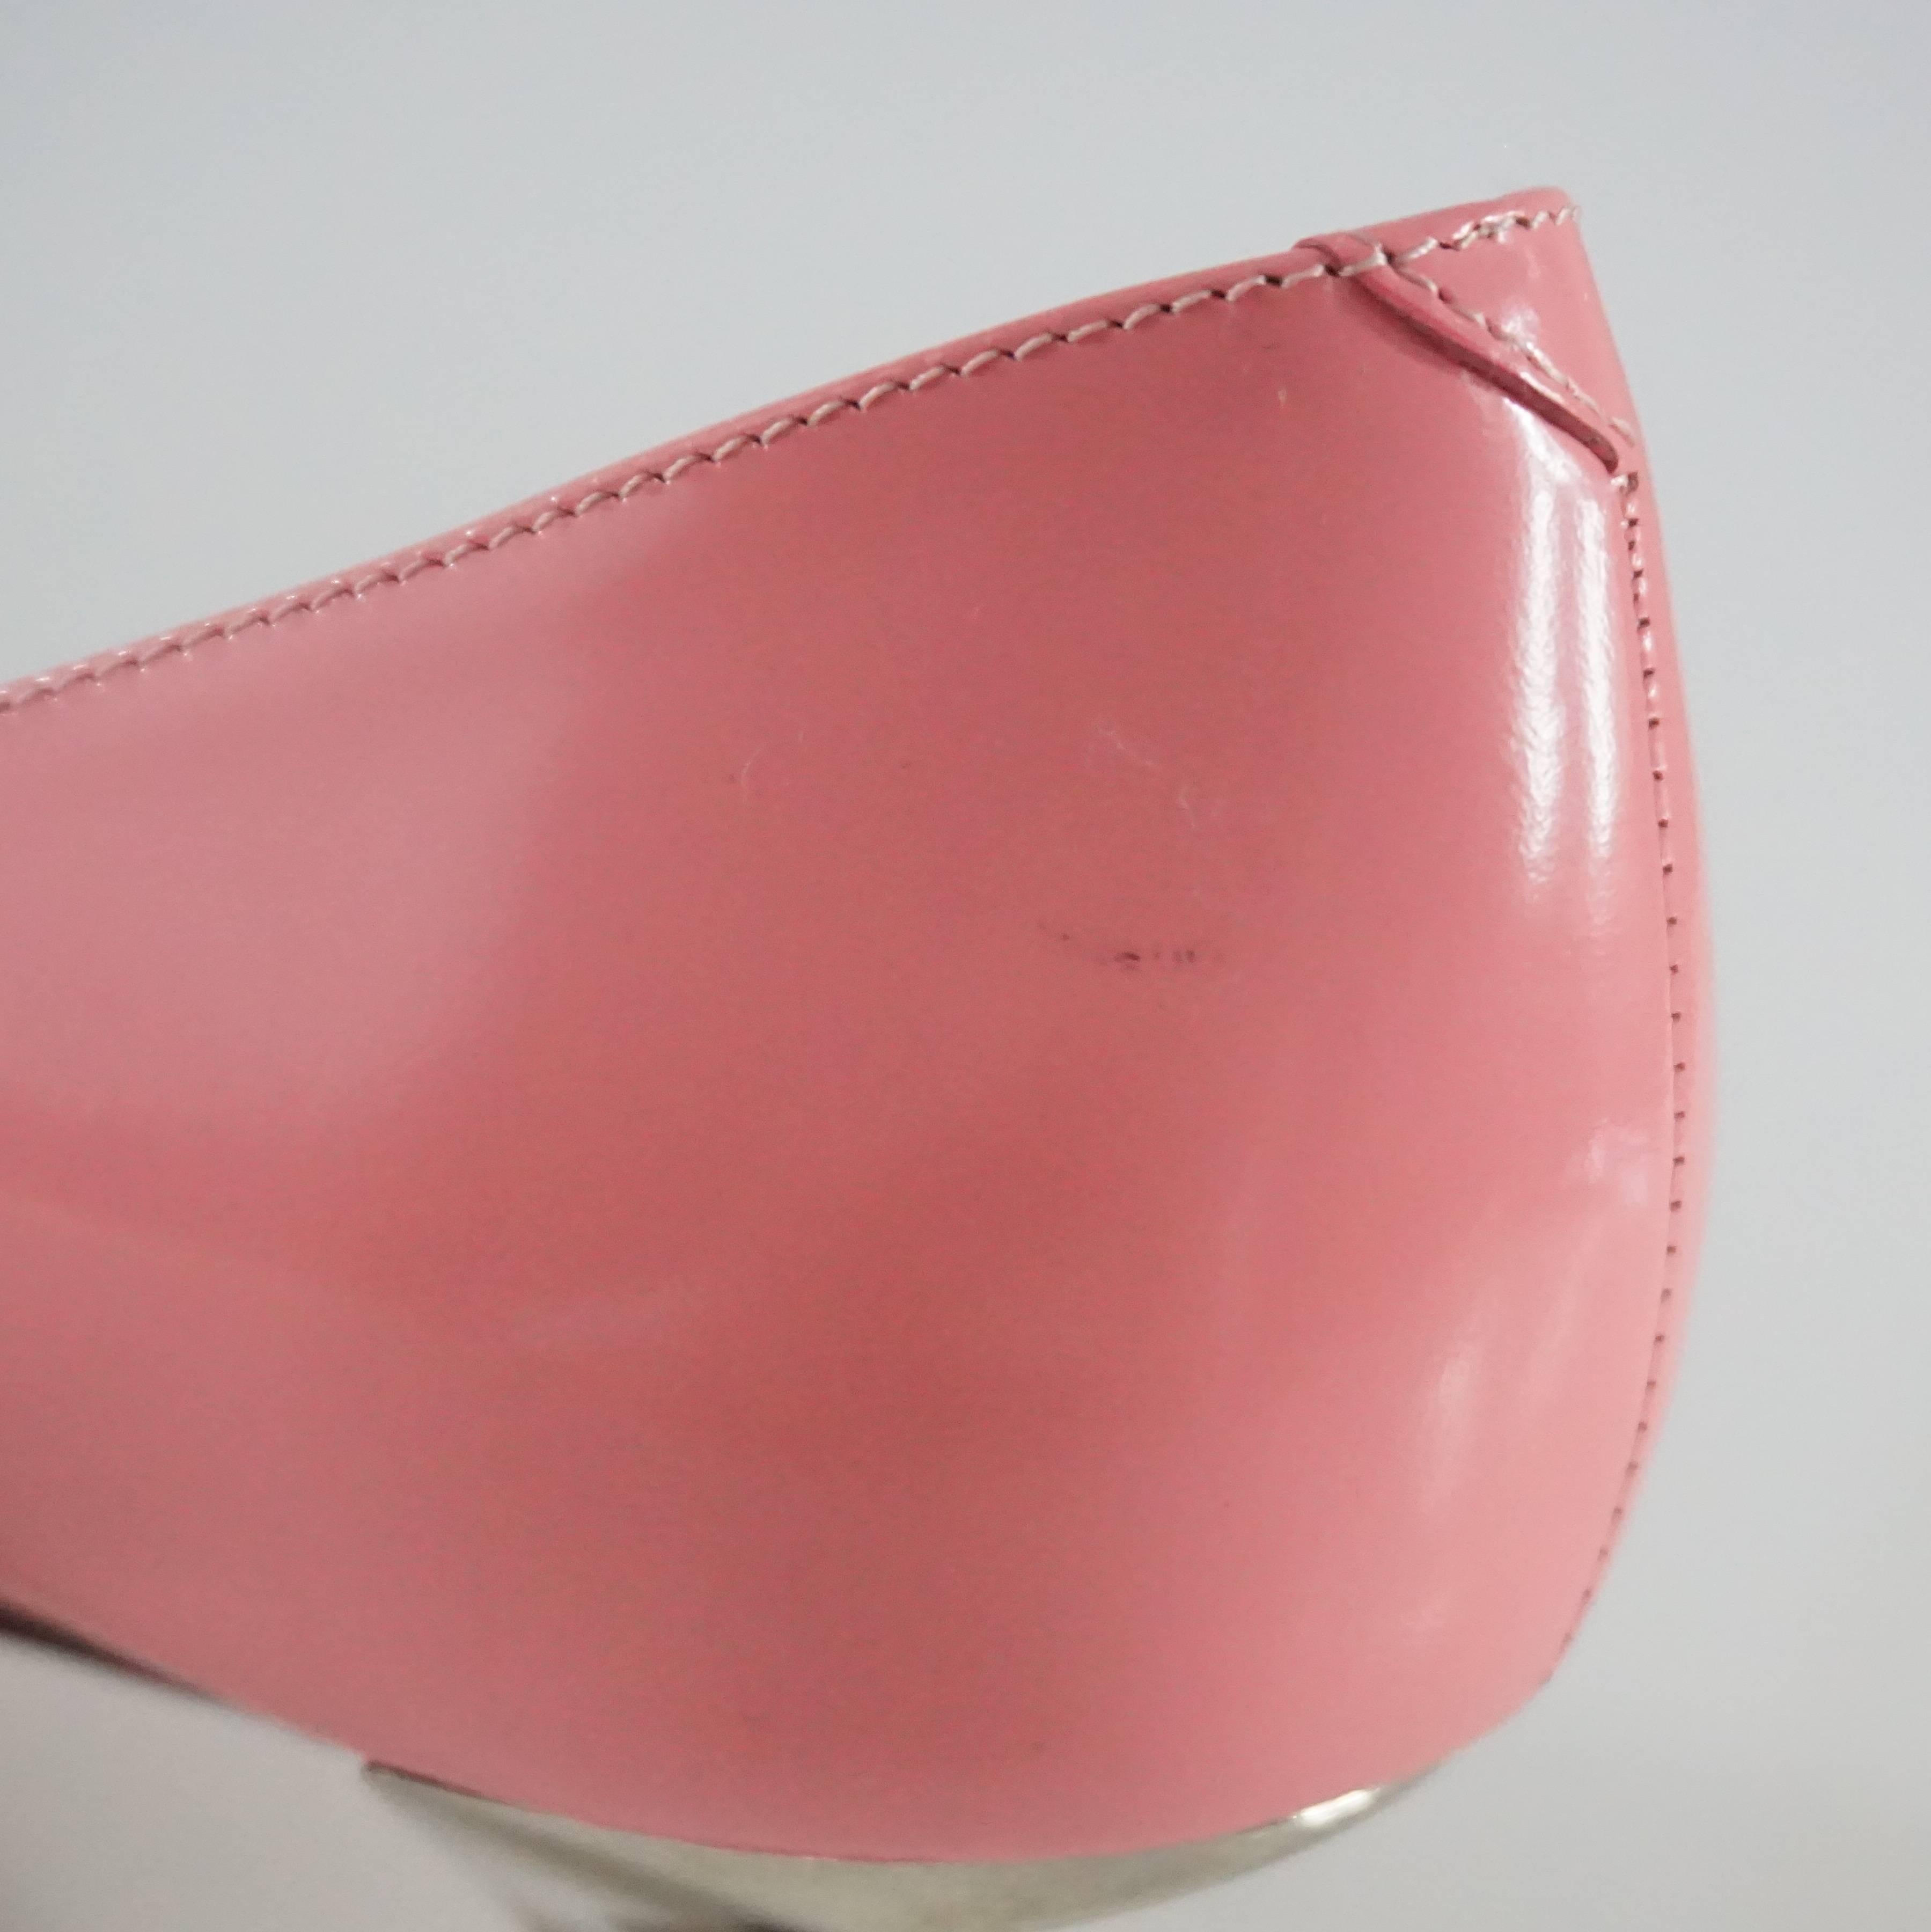 Roger Vivier Pink Leather Flats with Silver Heel - 37 For Sale 2